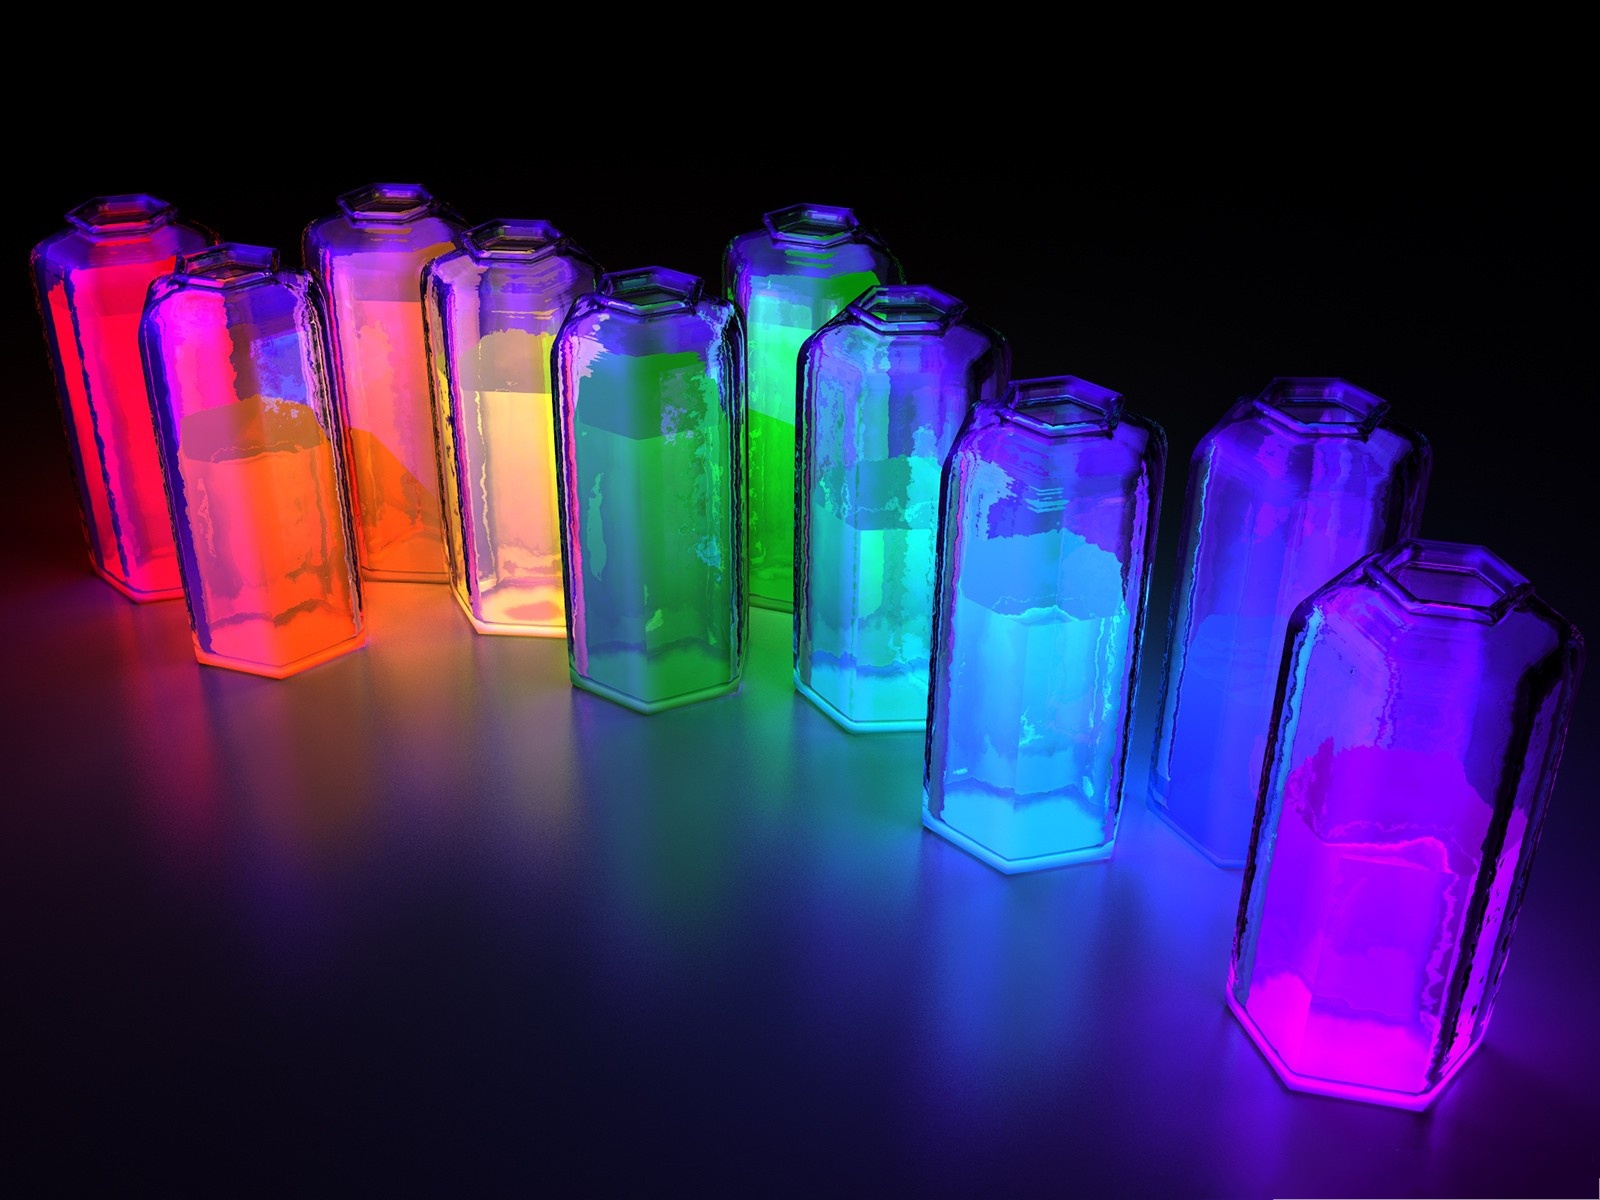 Background Colorful Bottles On Dark Add Color To Your